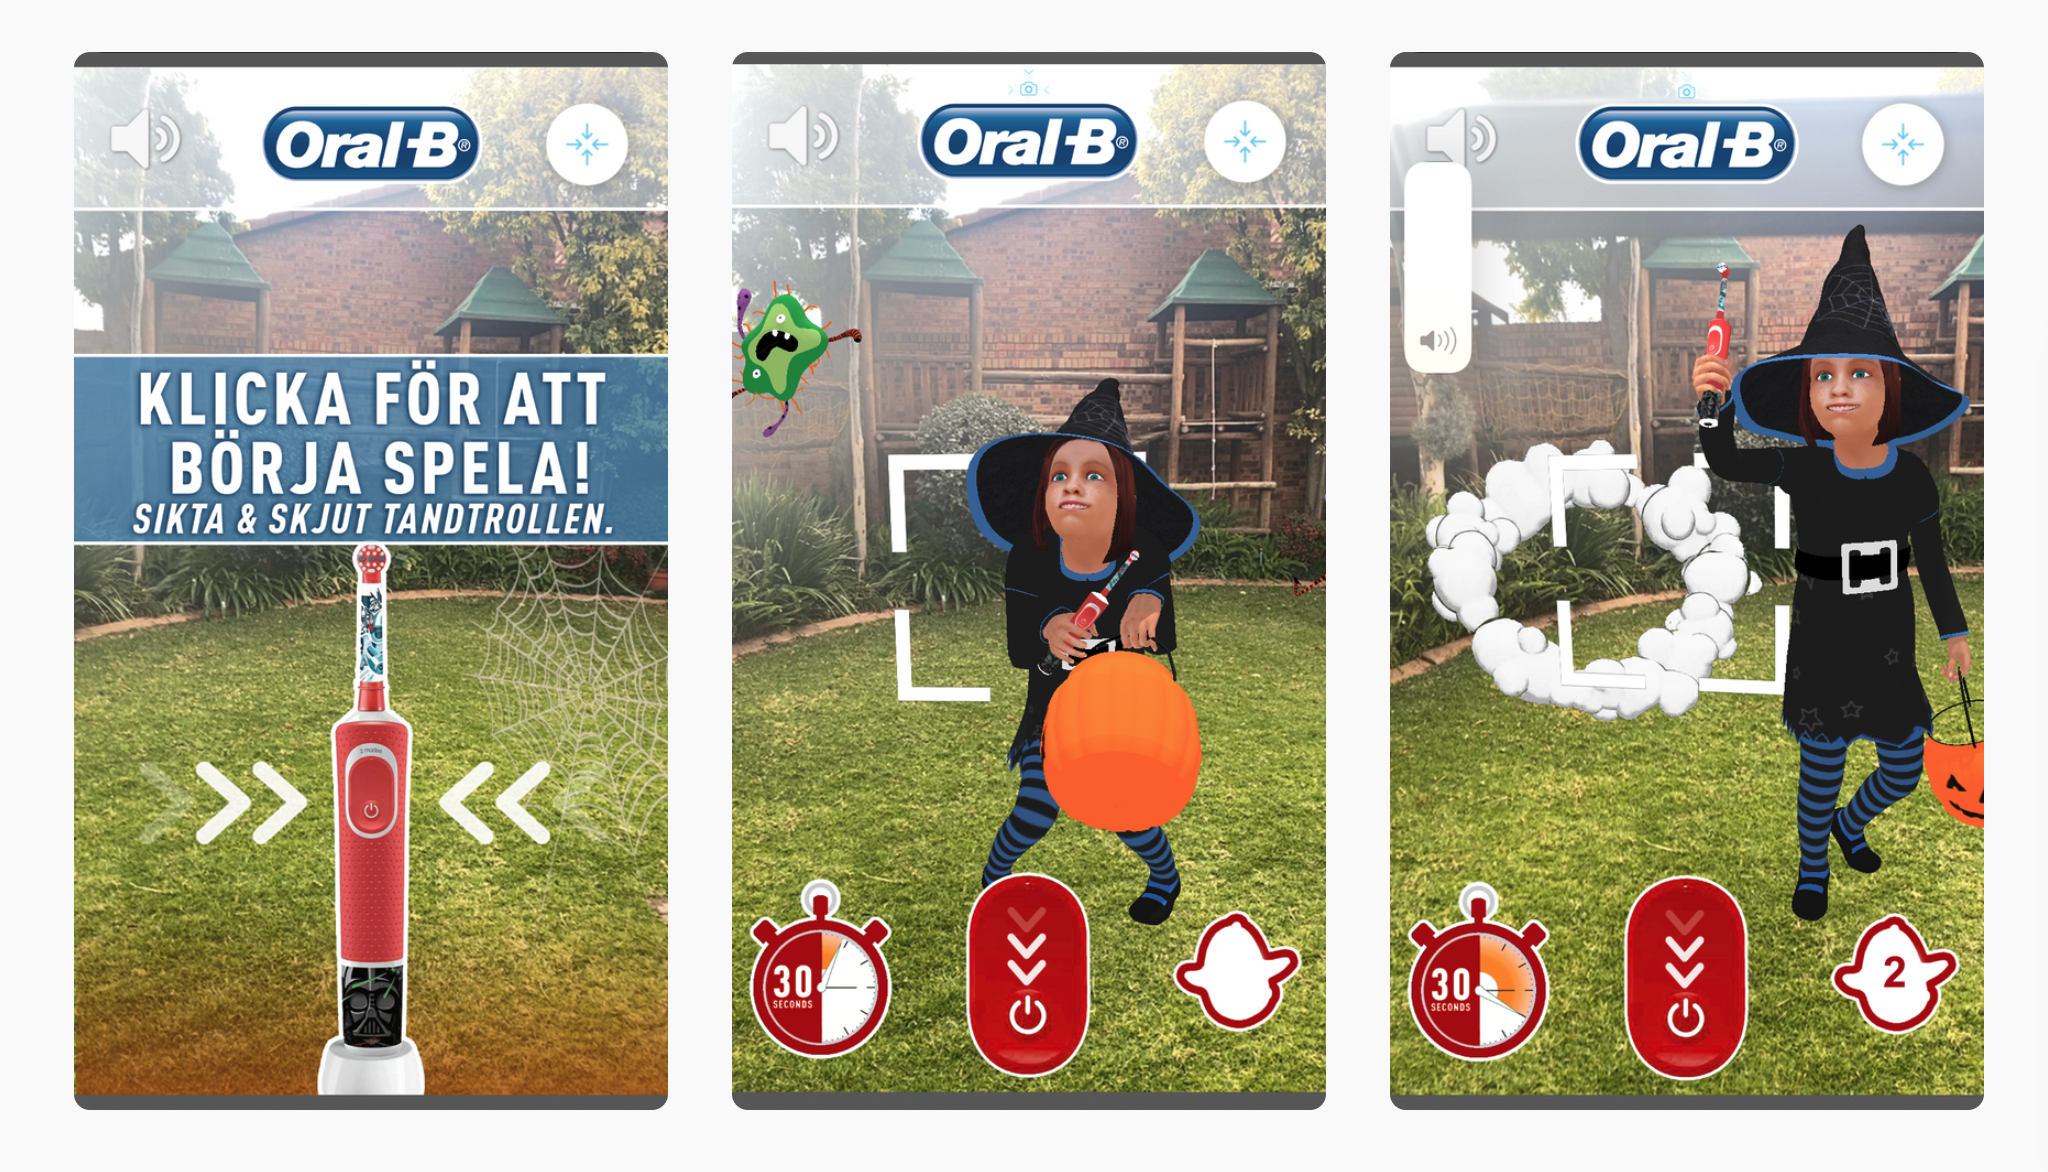 Oral B launches AR game to promote dental hygiene during the holiday season